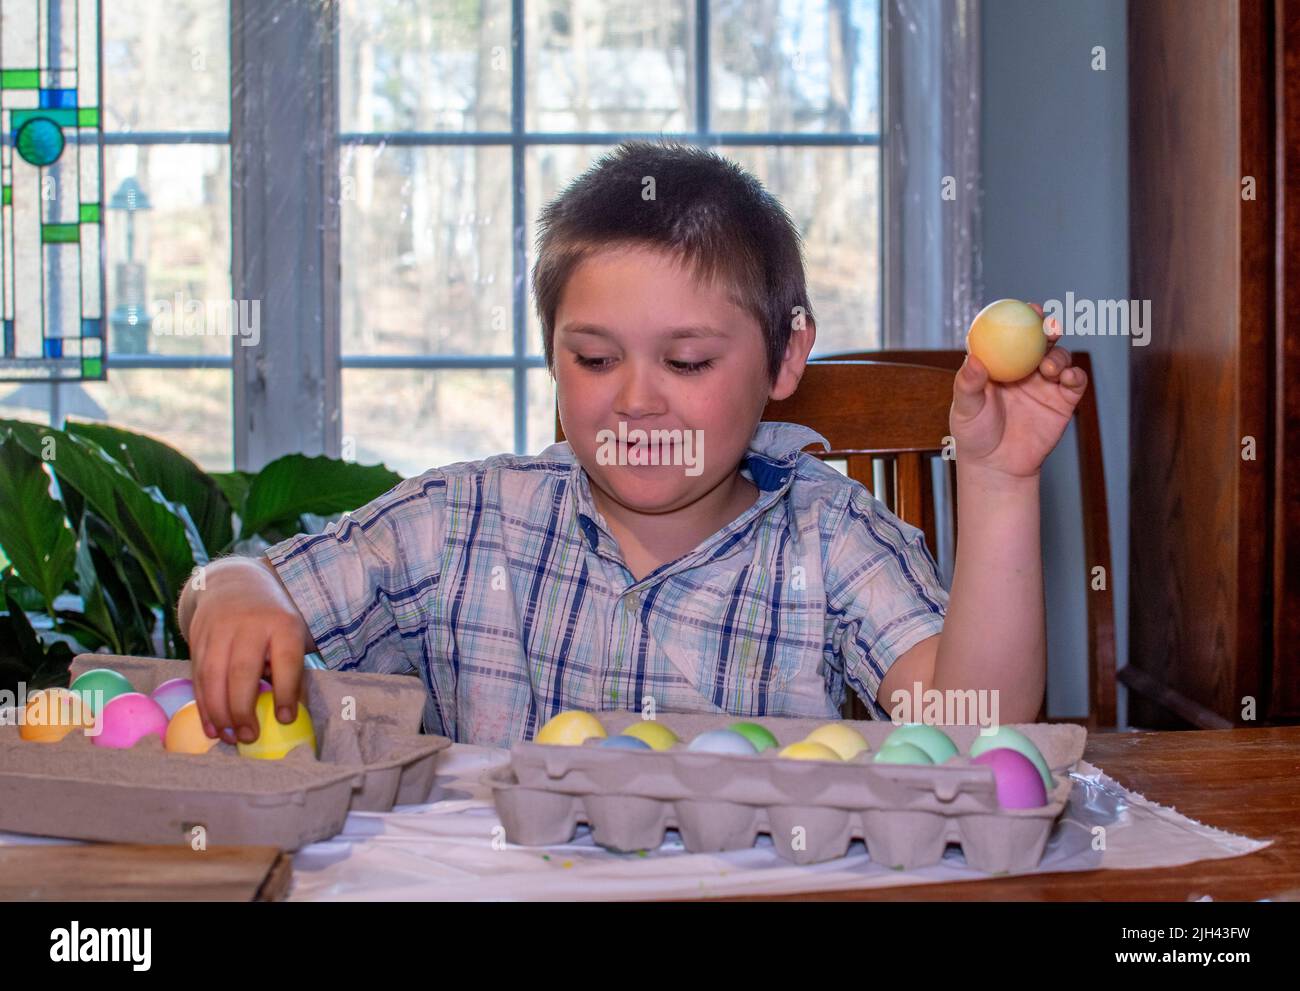 Smiling boy examines the colorful eggs he just created for Easter celebrations and egg hunts Stock Photo